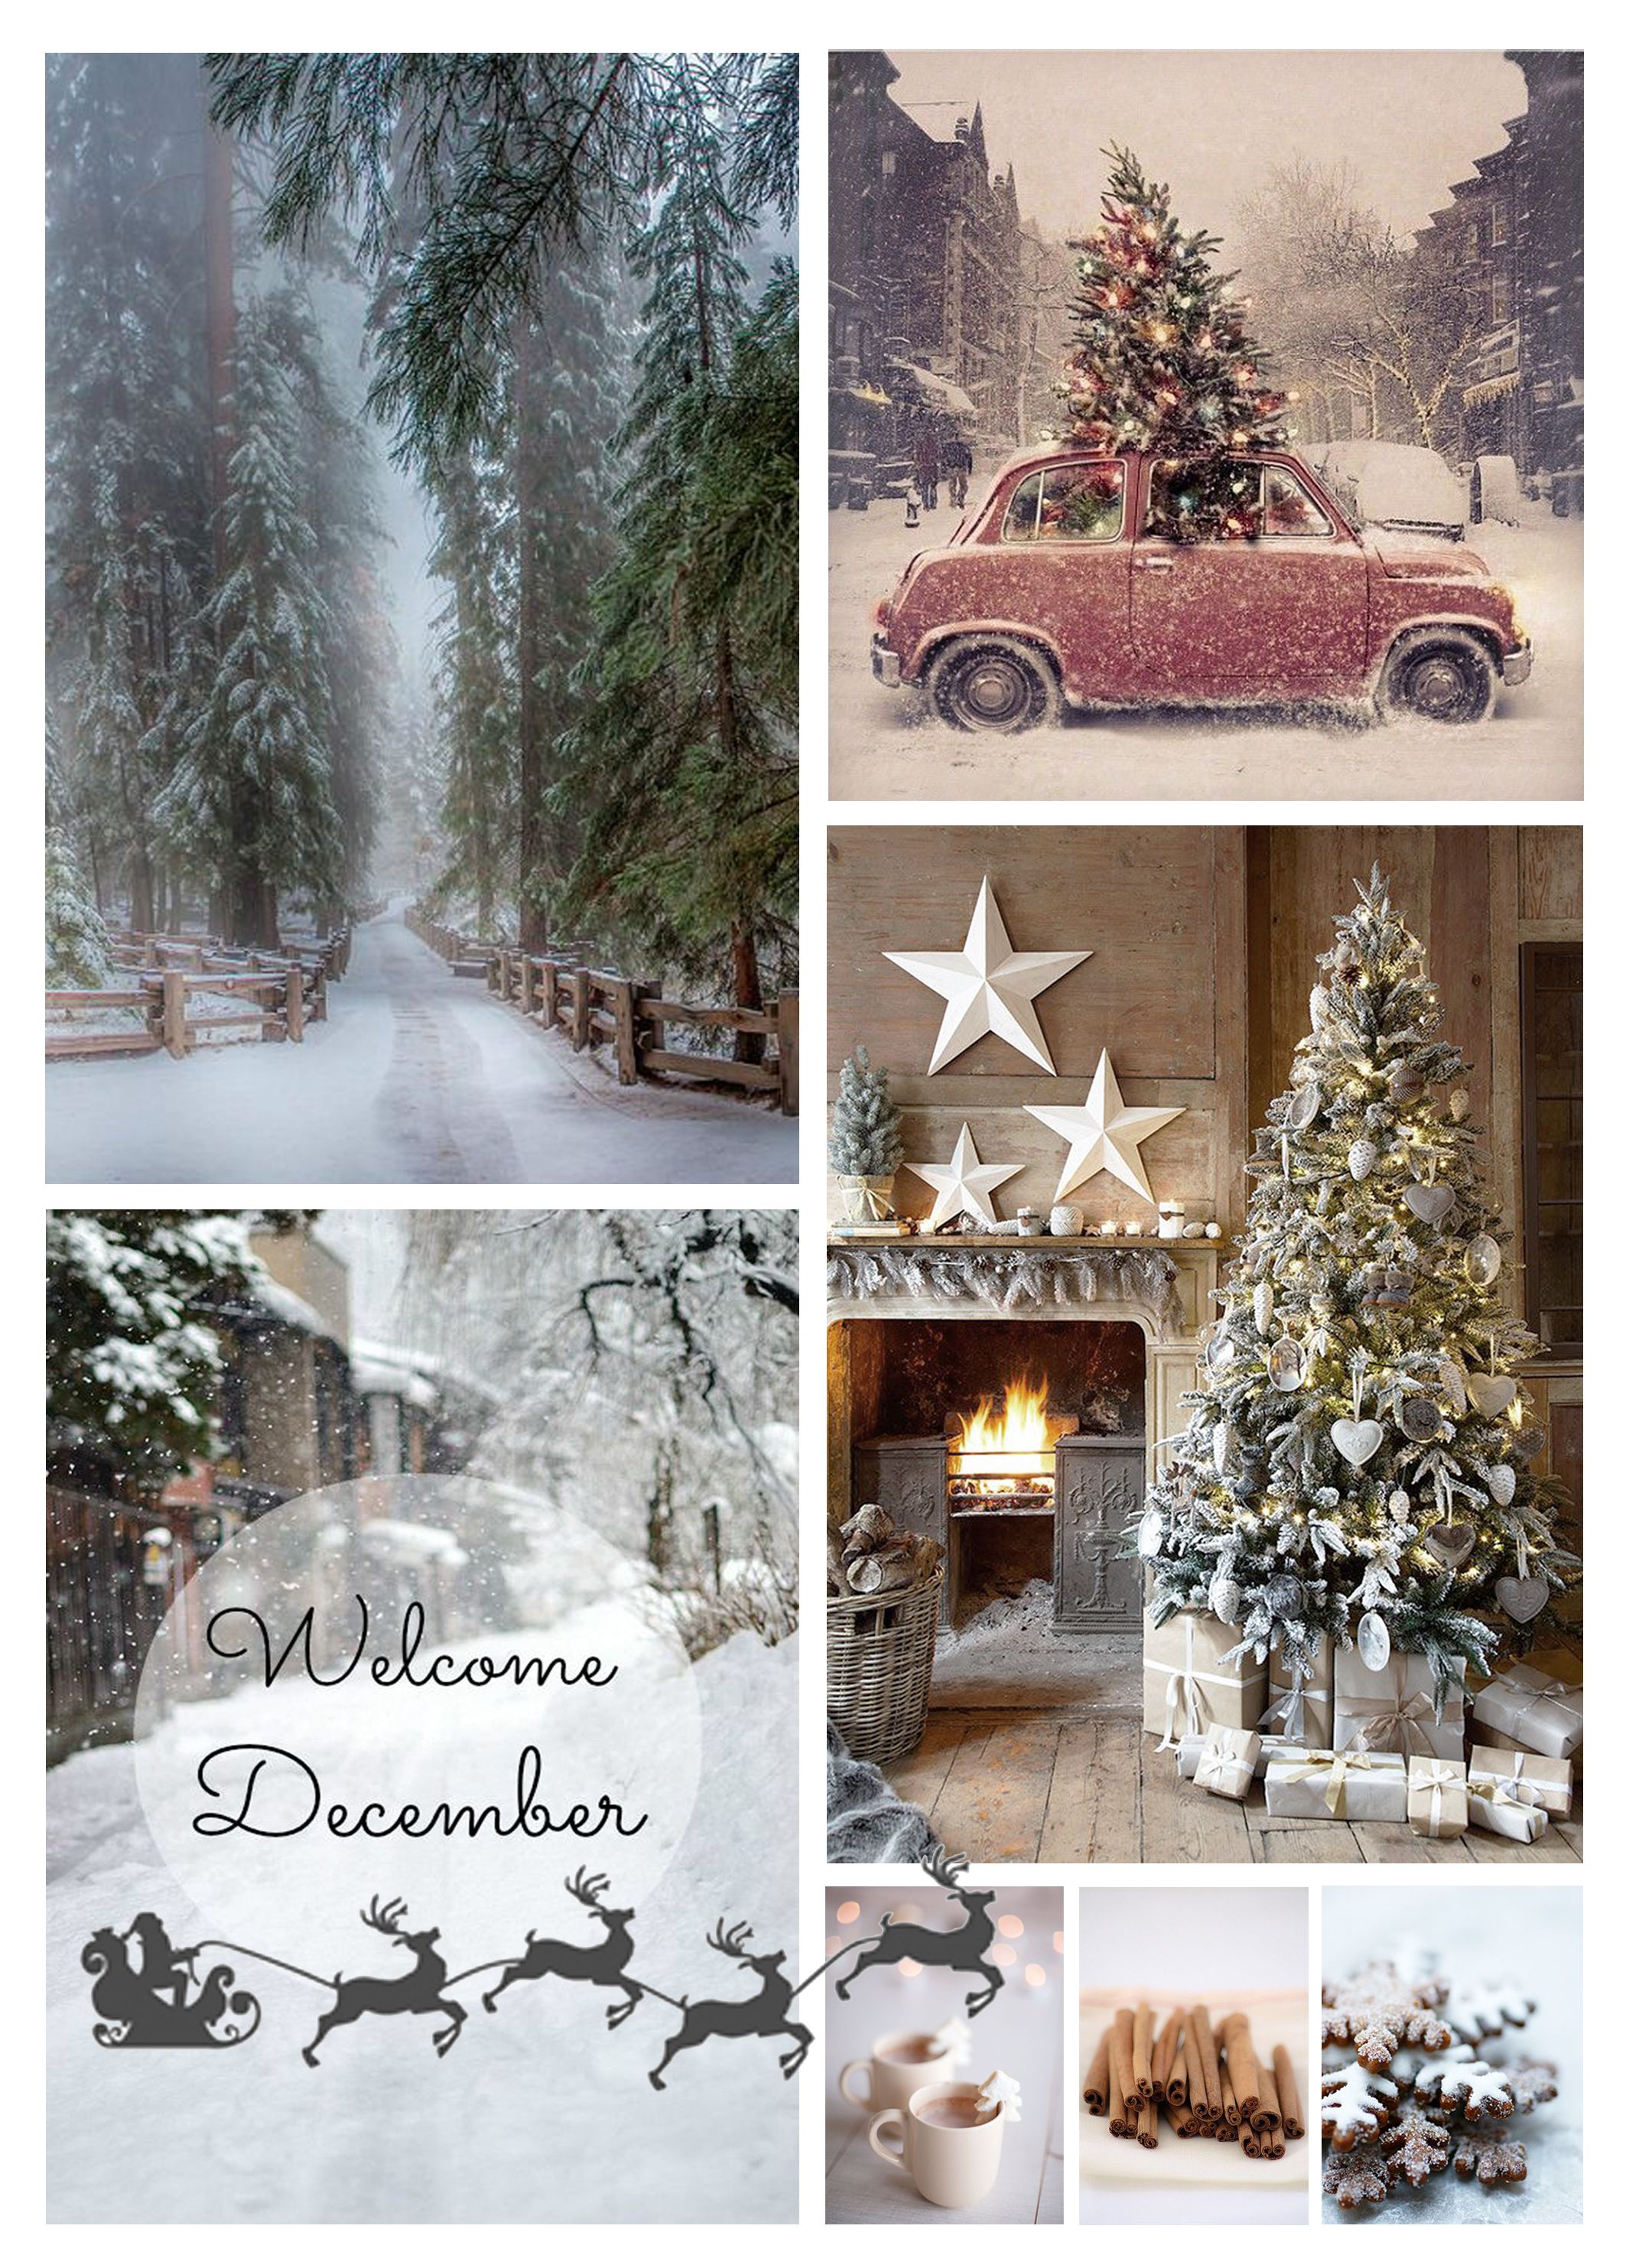 Welcome December!. Welcome december, Hello december, December picture